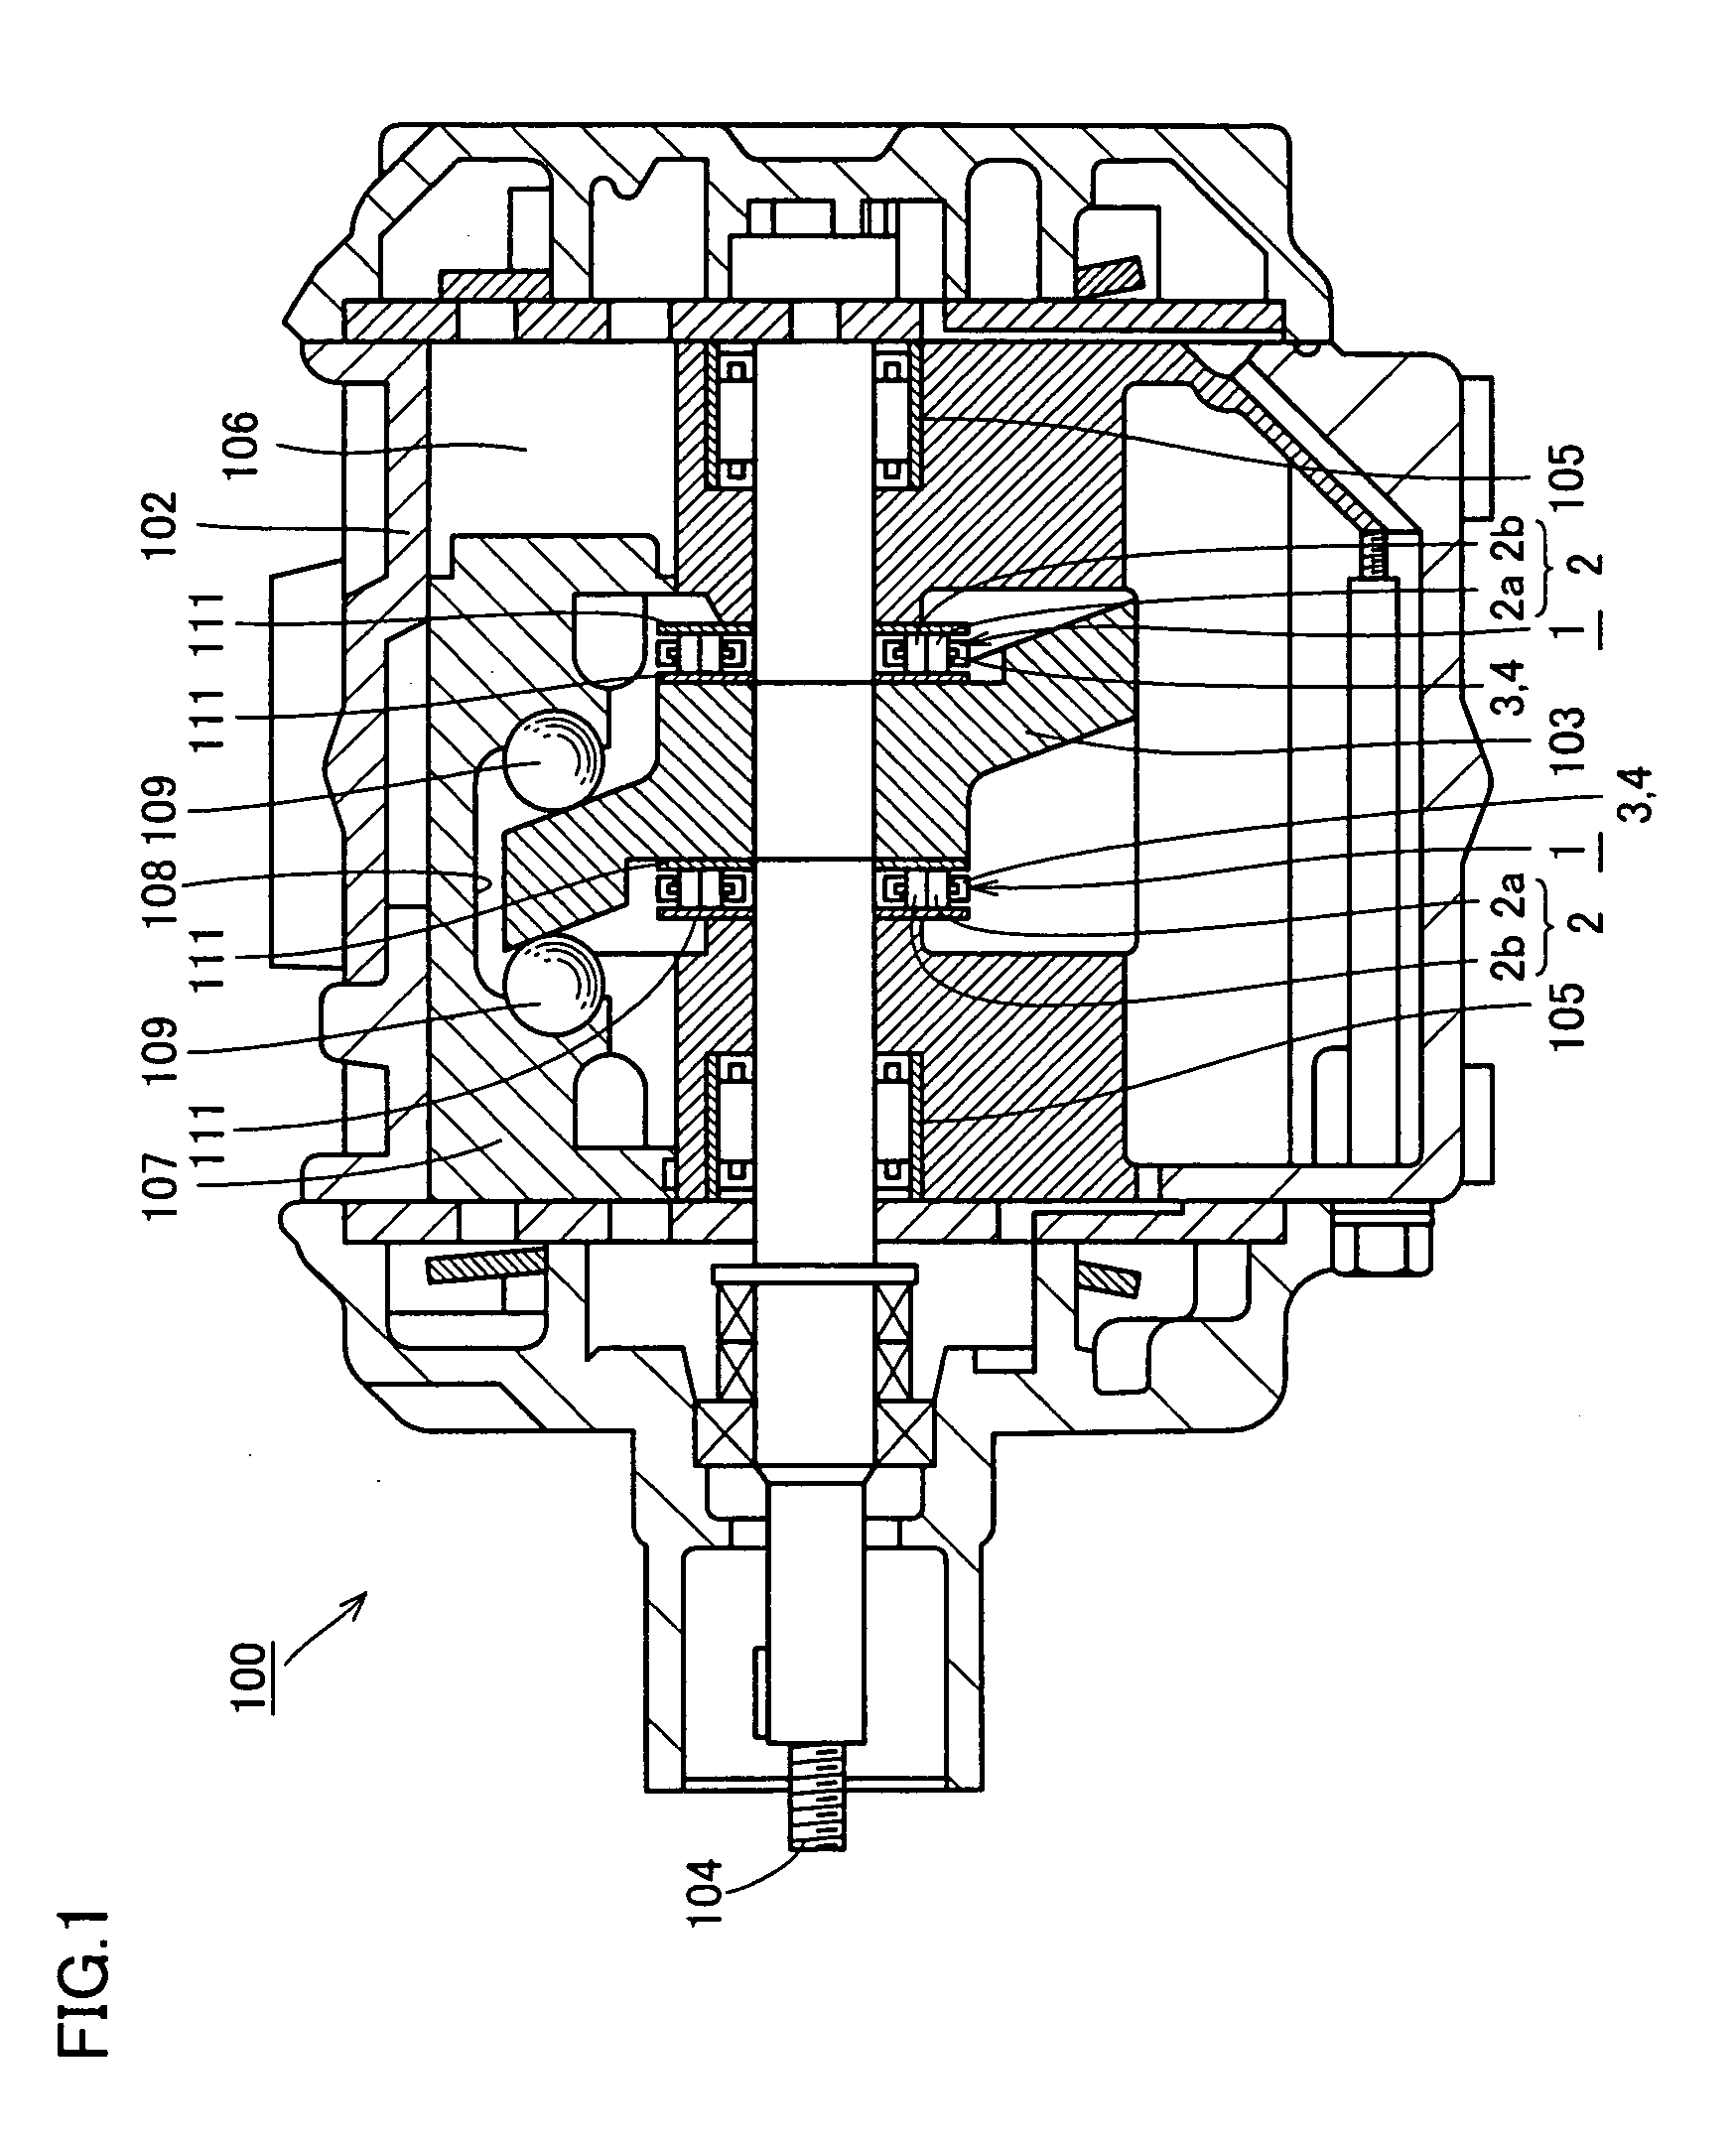 Support structure carrying thrust load of compressor and thrust needle roller bearing